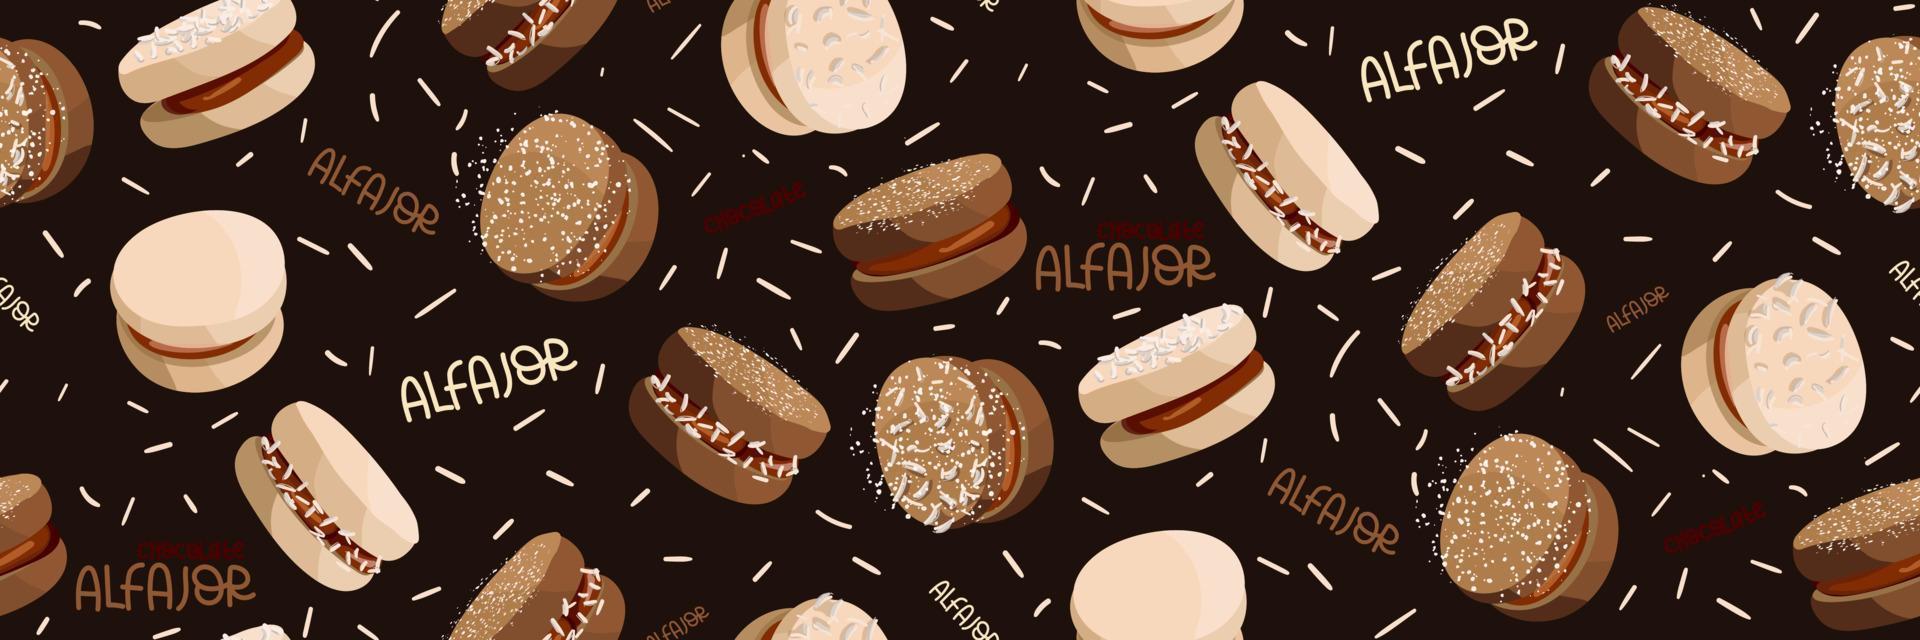 The pattern from the traditional Argentine dessert Alfagor is ordinary, chocolate with dots. Latin American food. Suitable for printing on textiles and paper. Printing for gift wrapping vector